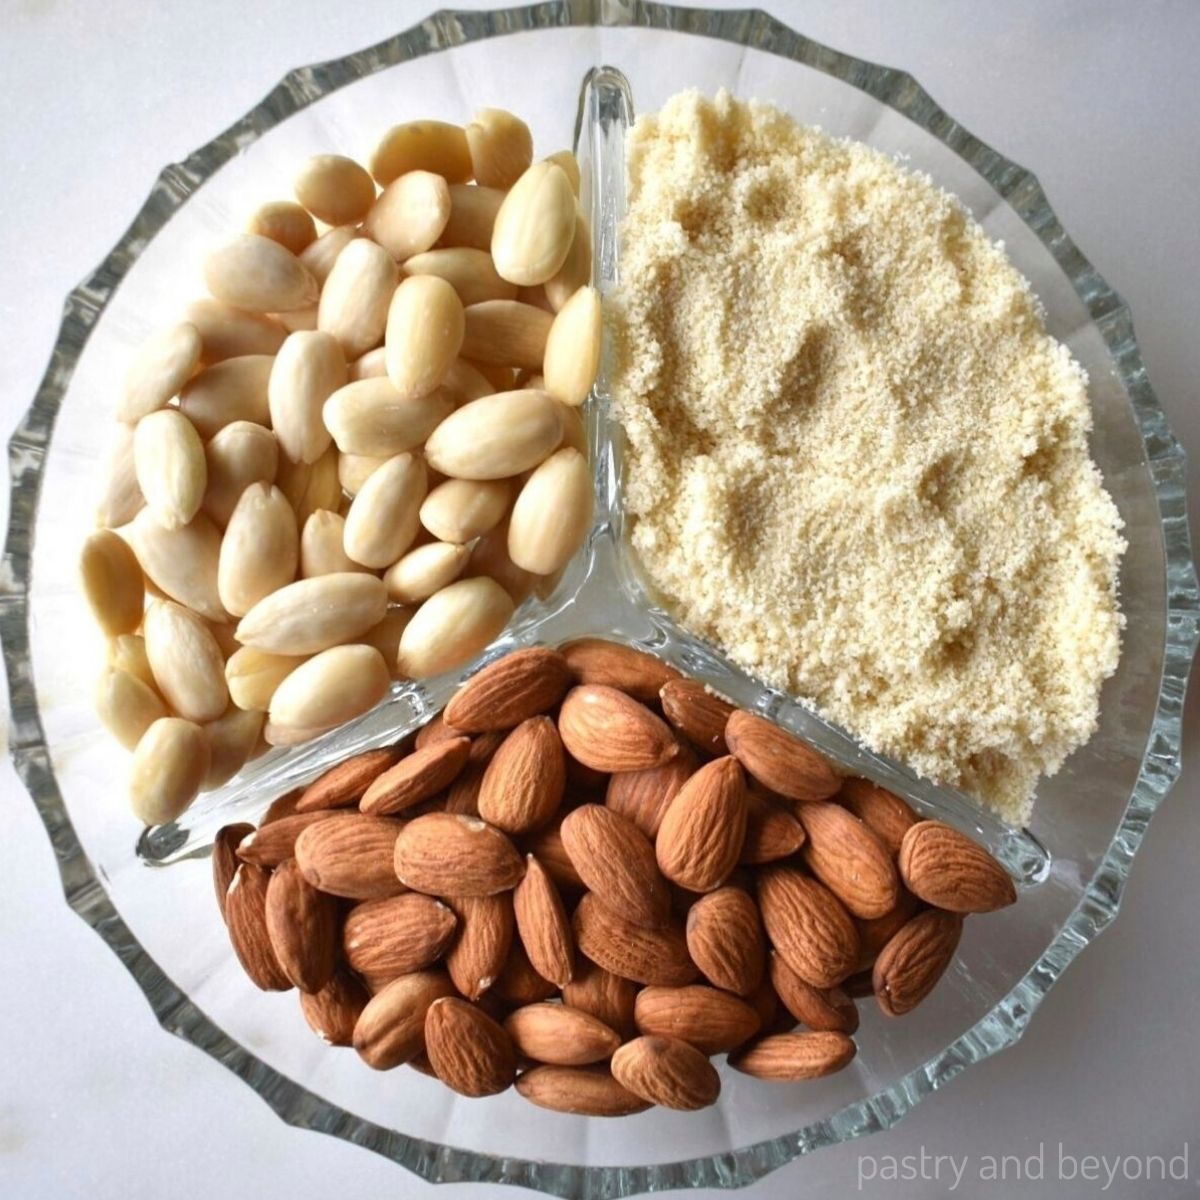 How To Make Almond Flour With Your Blender